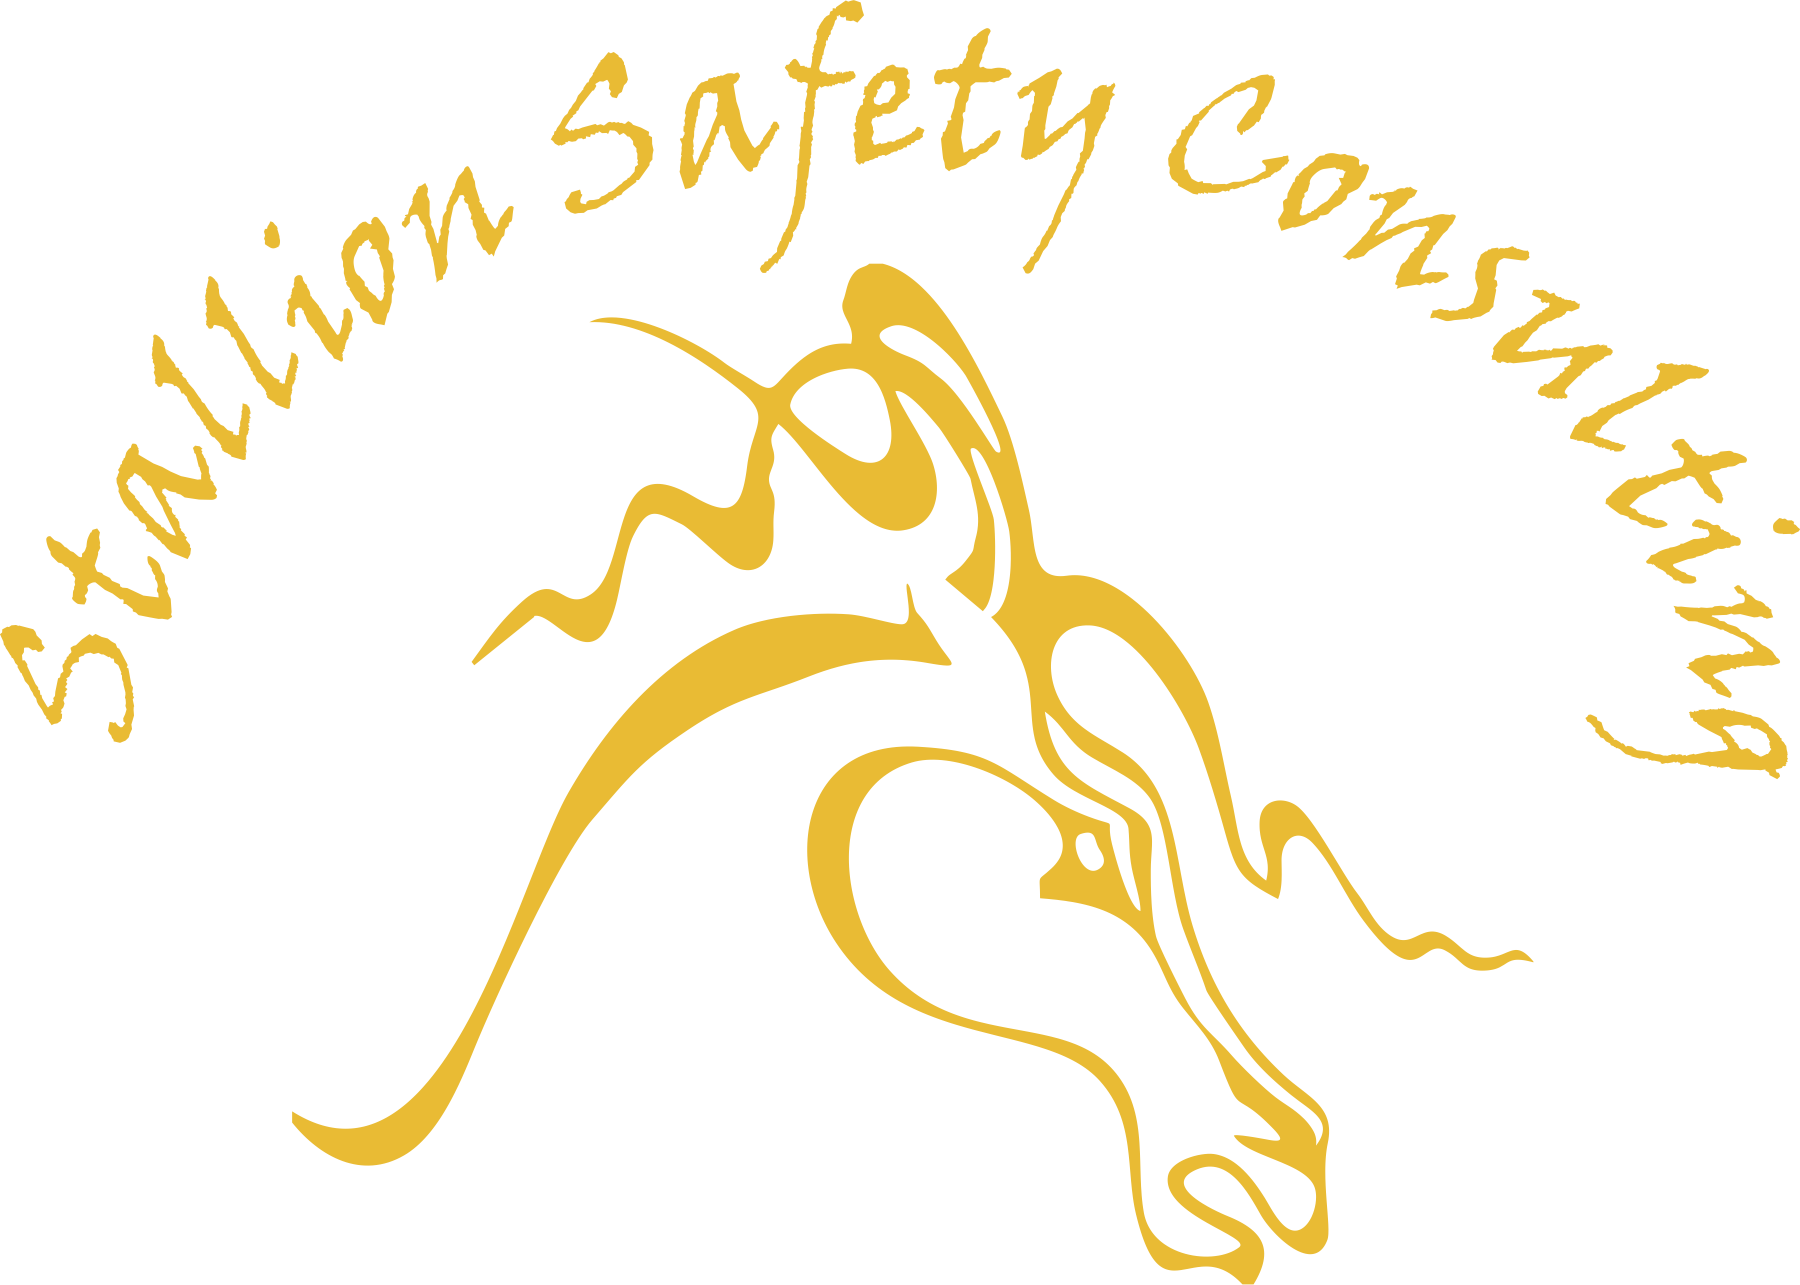 Environment Health & Safety Management Course Program – Stallion Safety,  Training & Swag